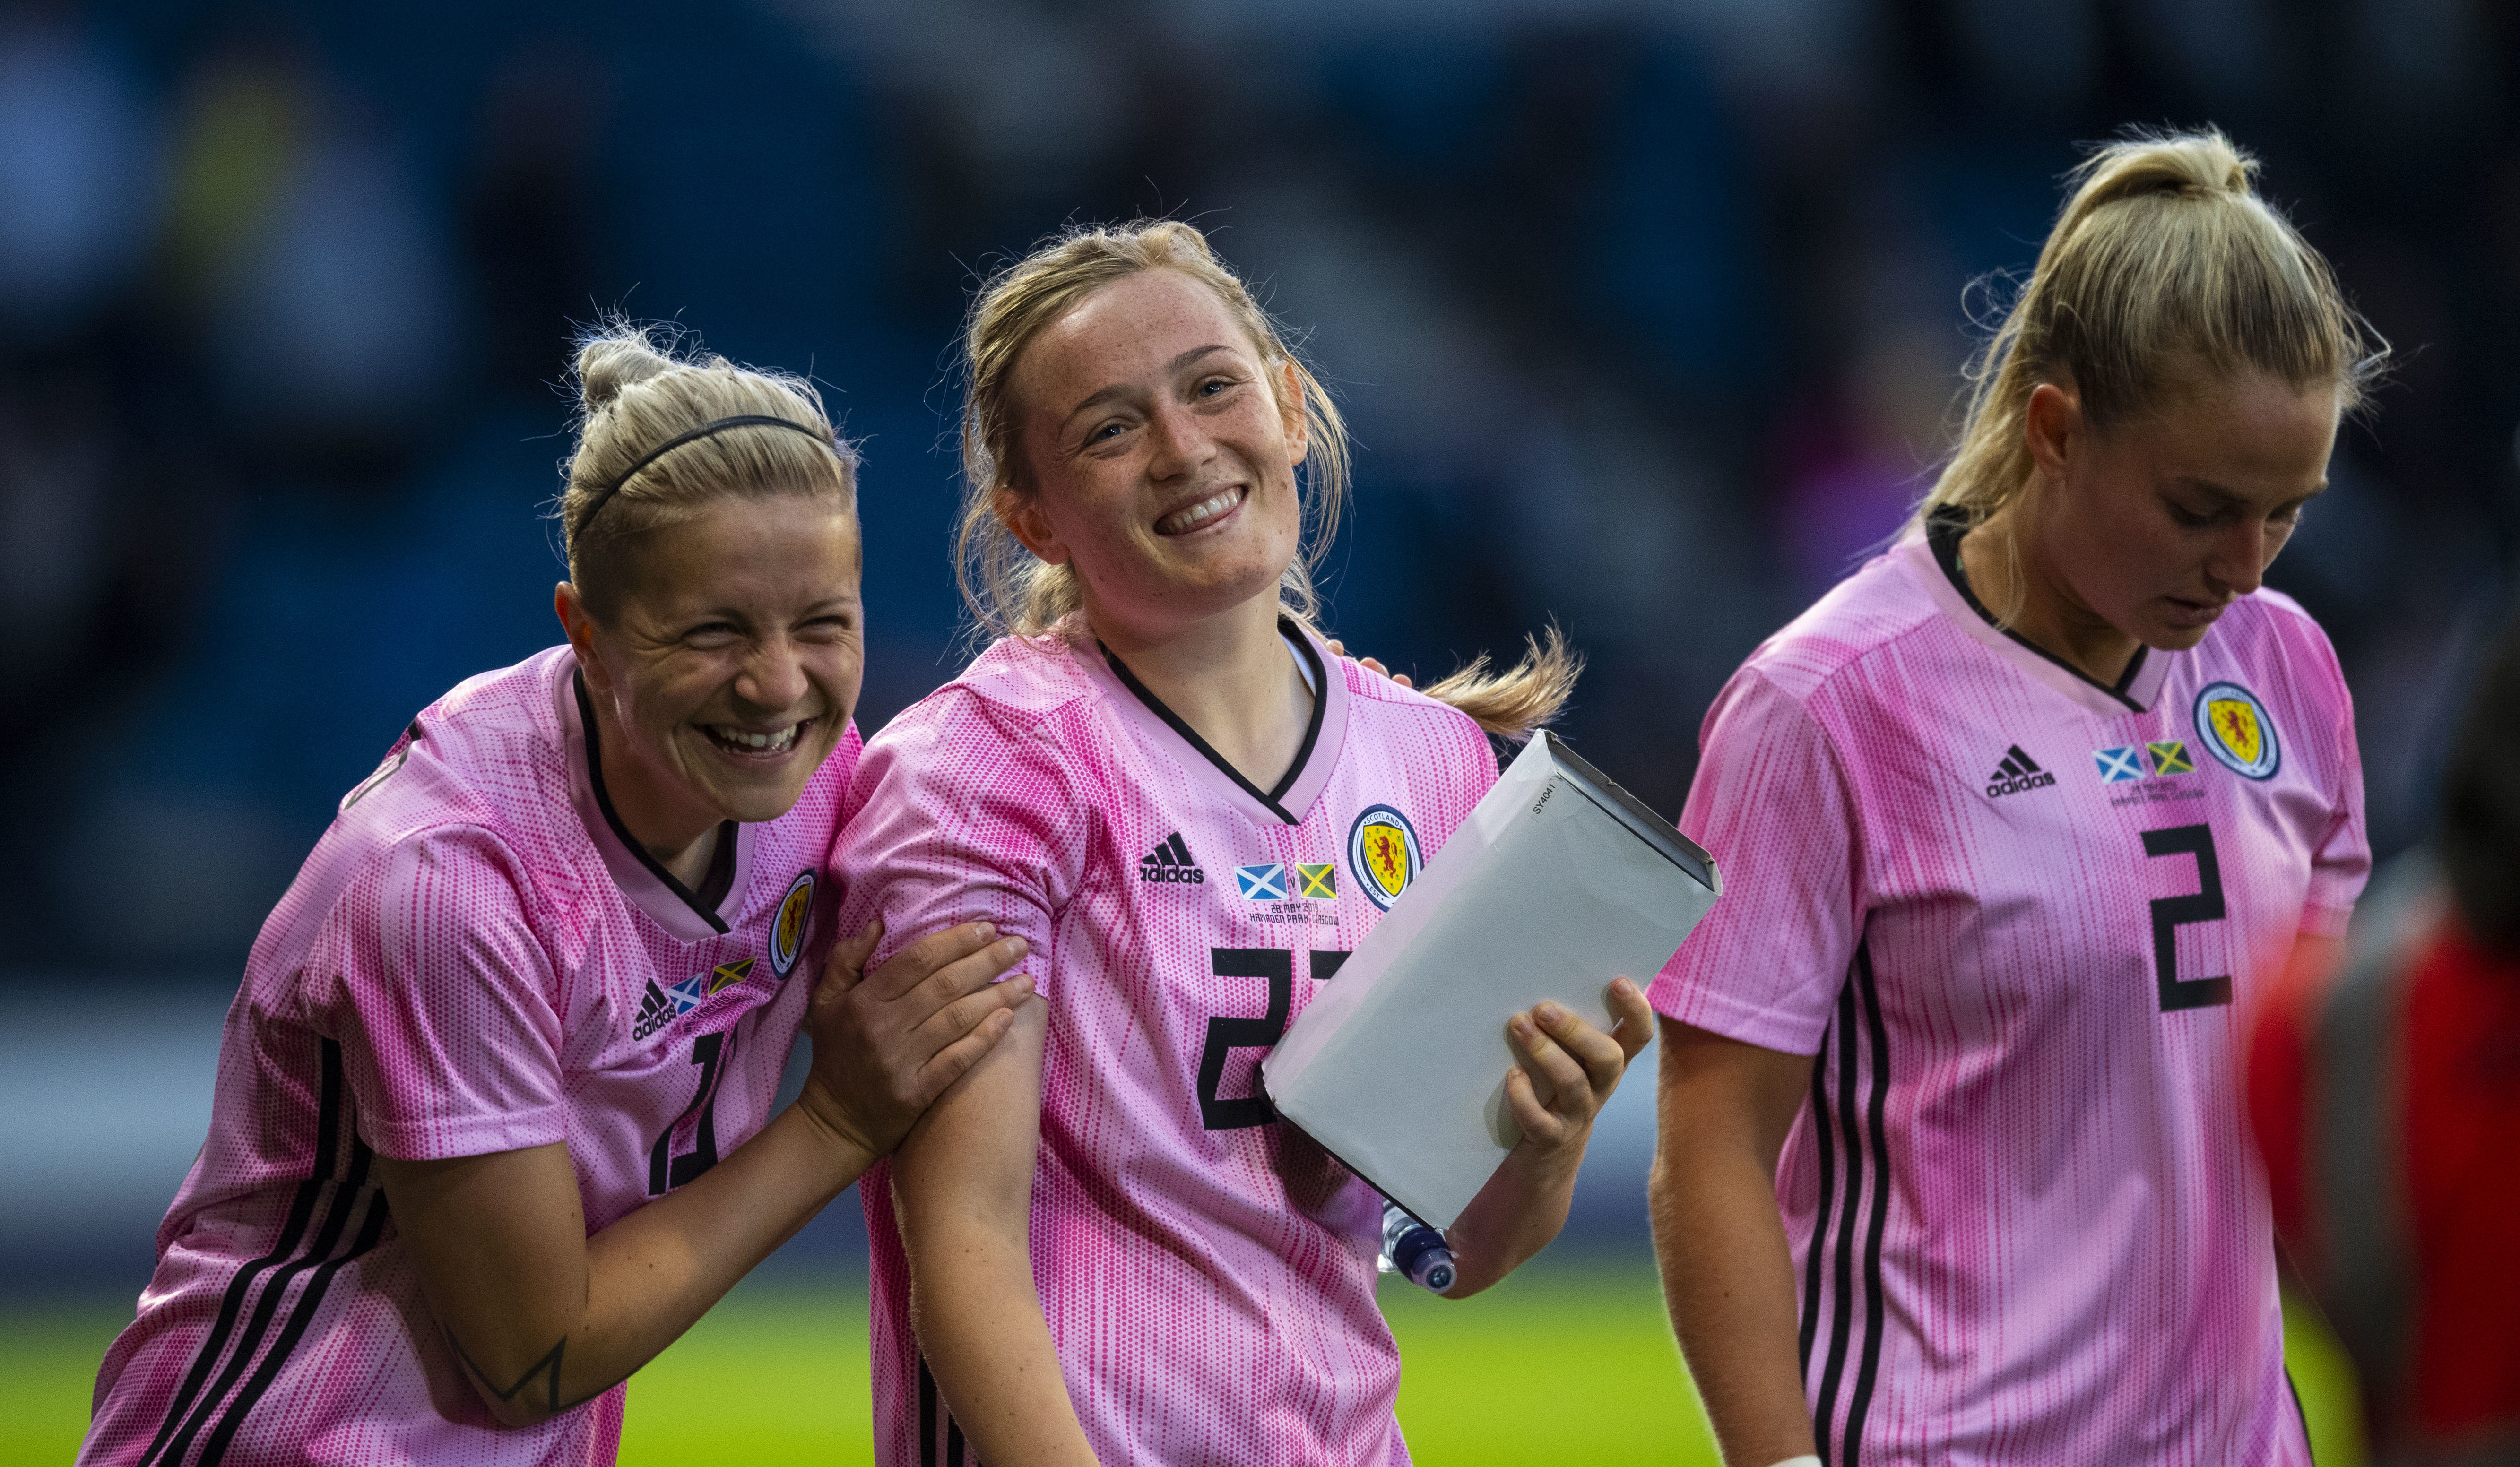 Scotland's women are ready for World Cup challenge.